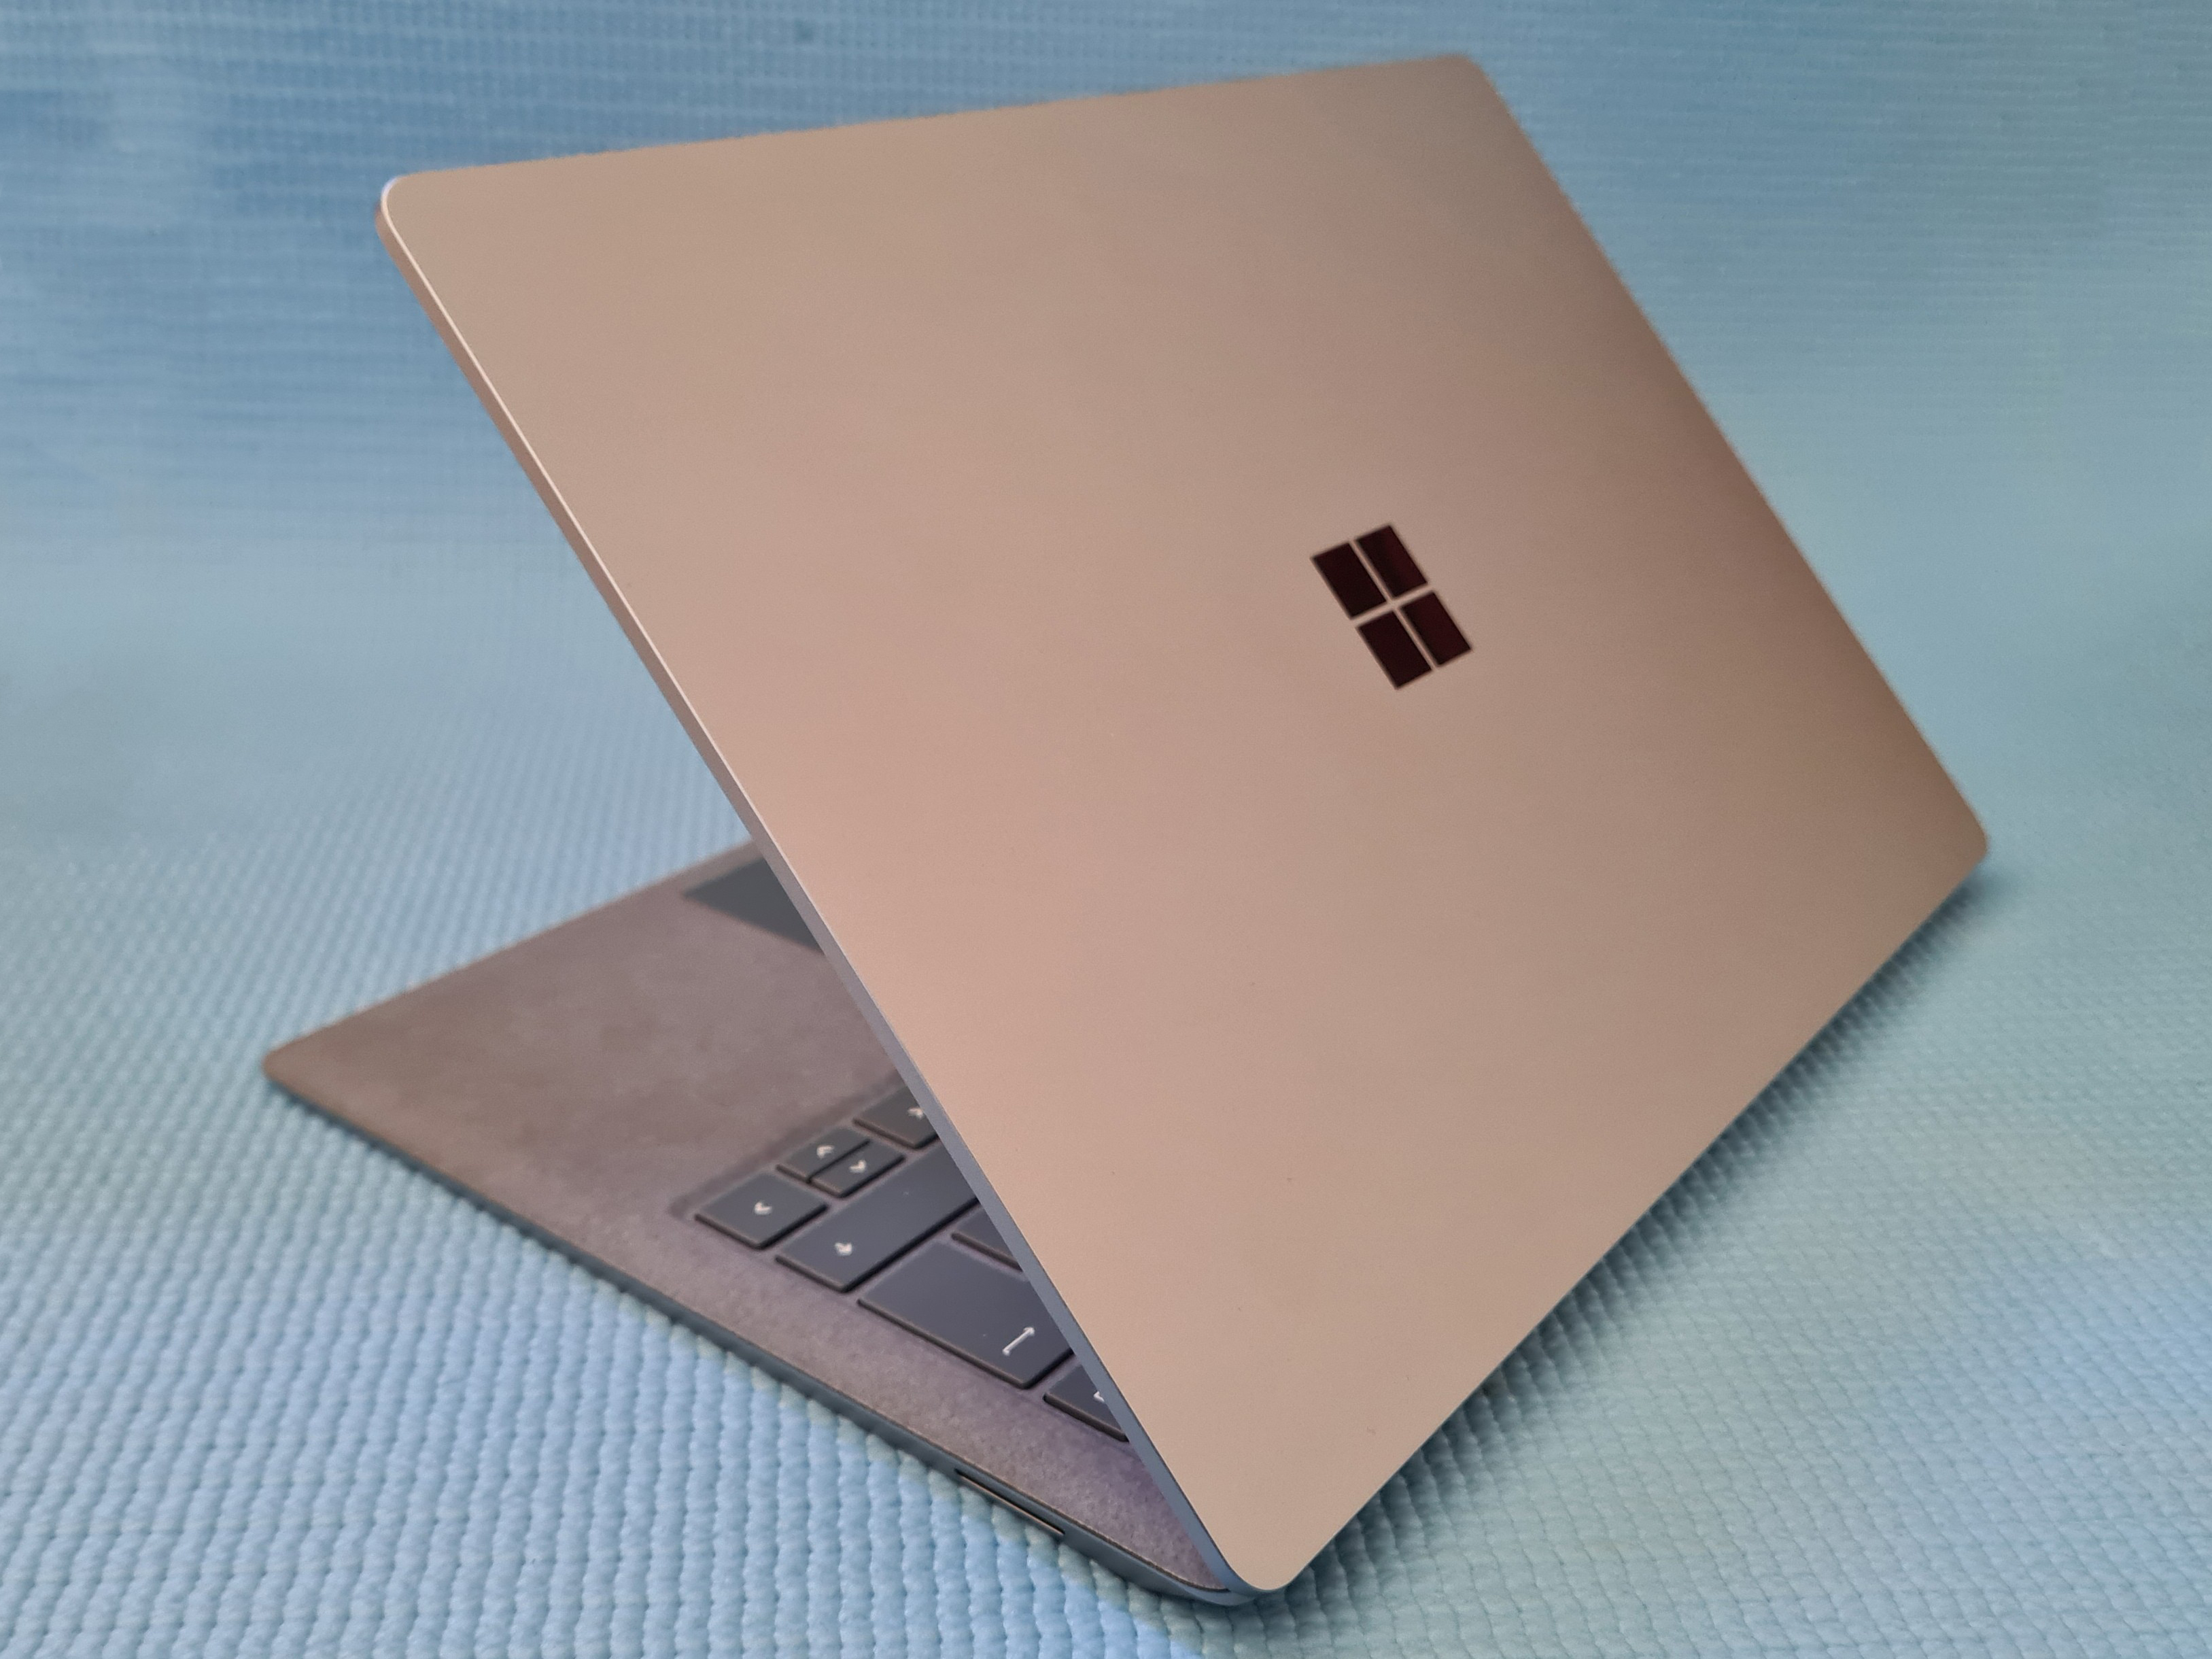 Taking Microsoft's Surface Laptop 4 for a spin